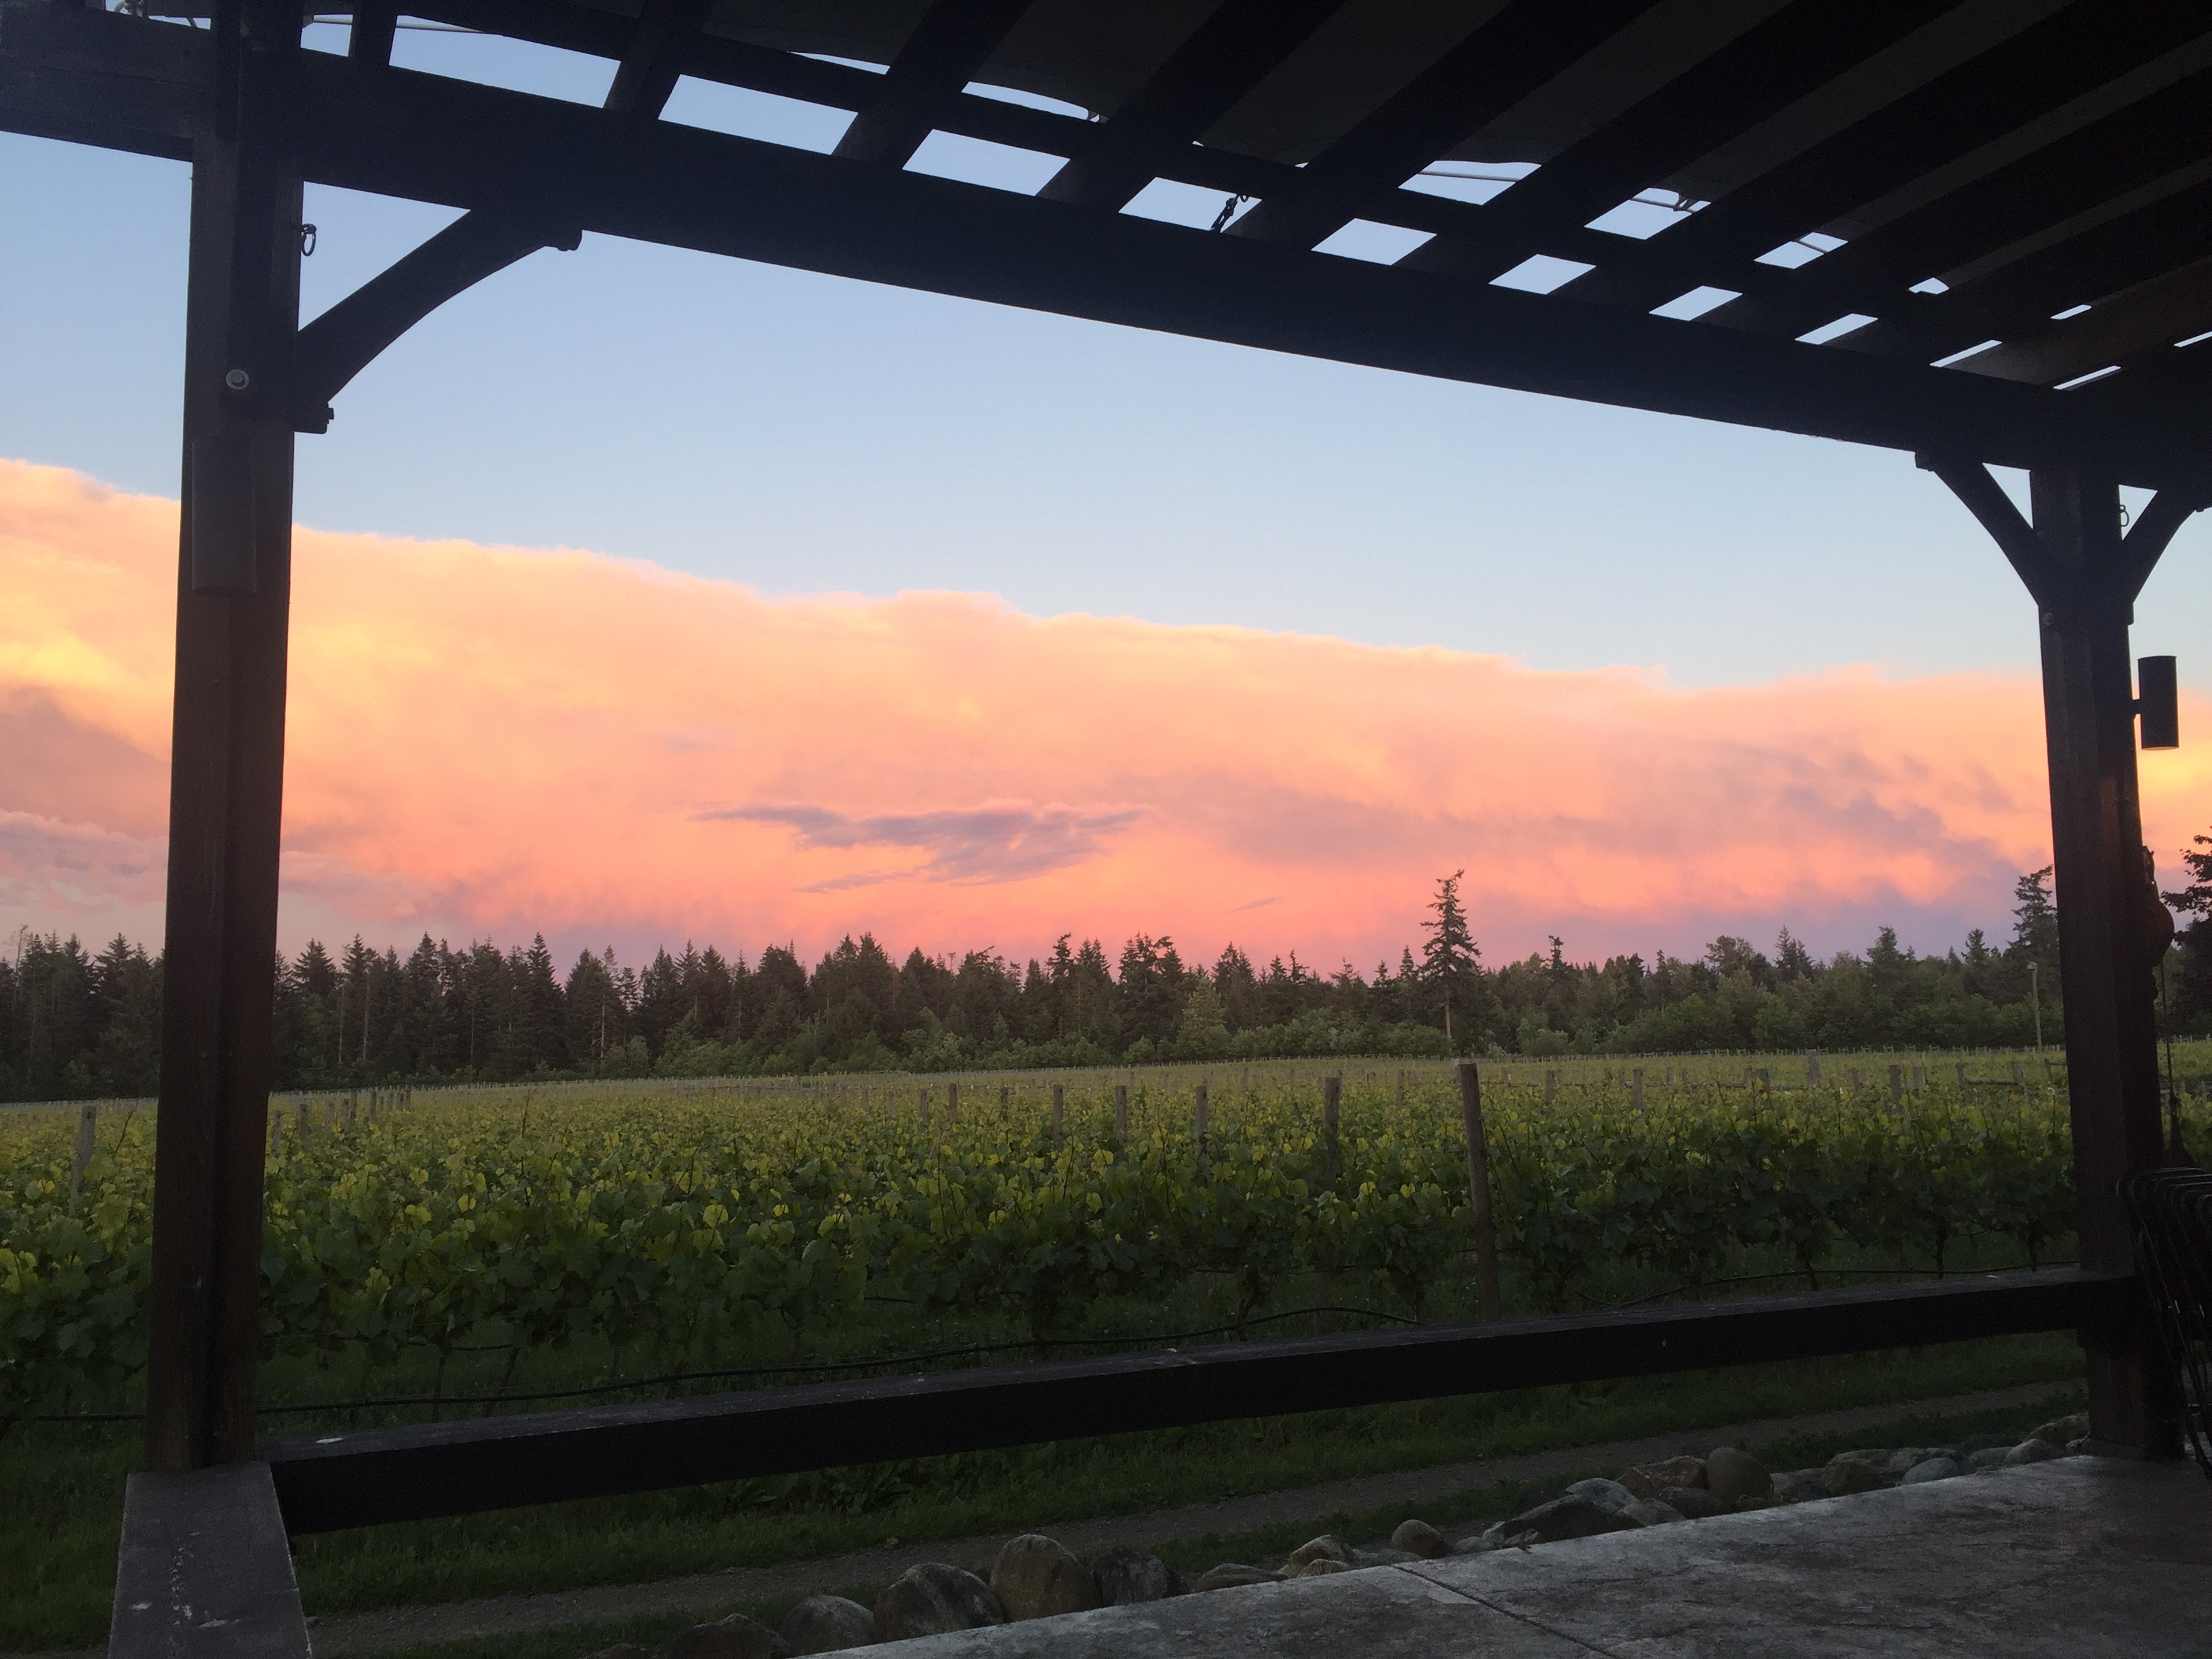 Image of the wine fields with sunset in the background.